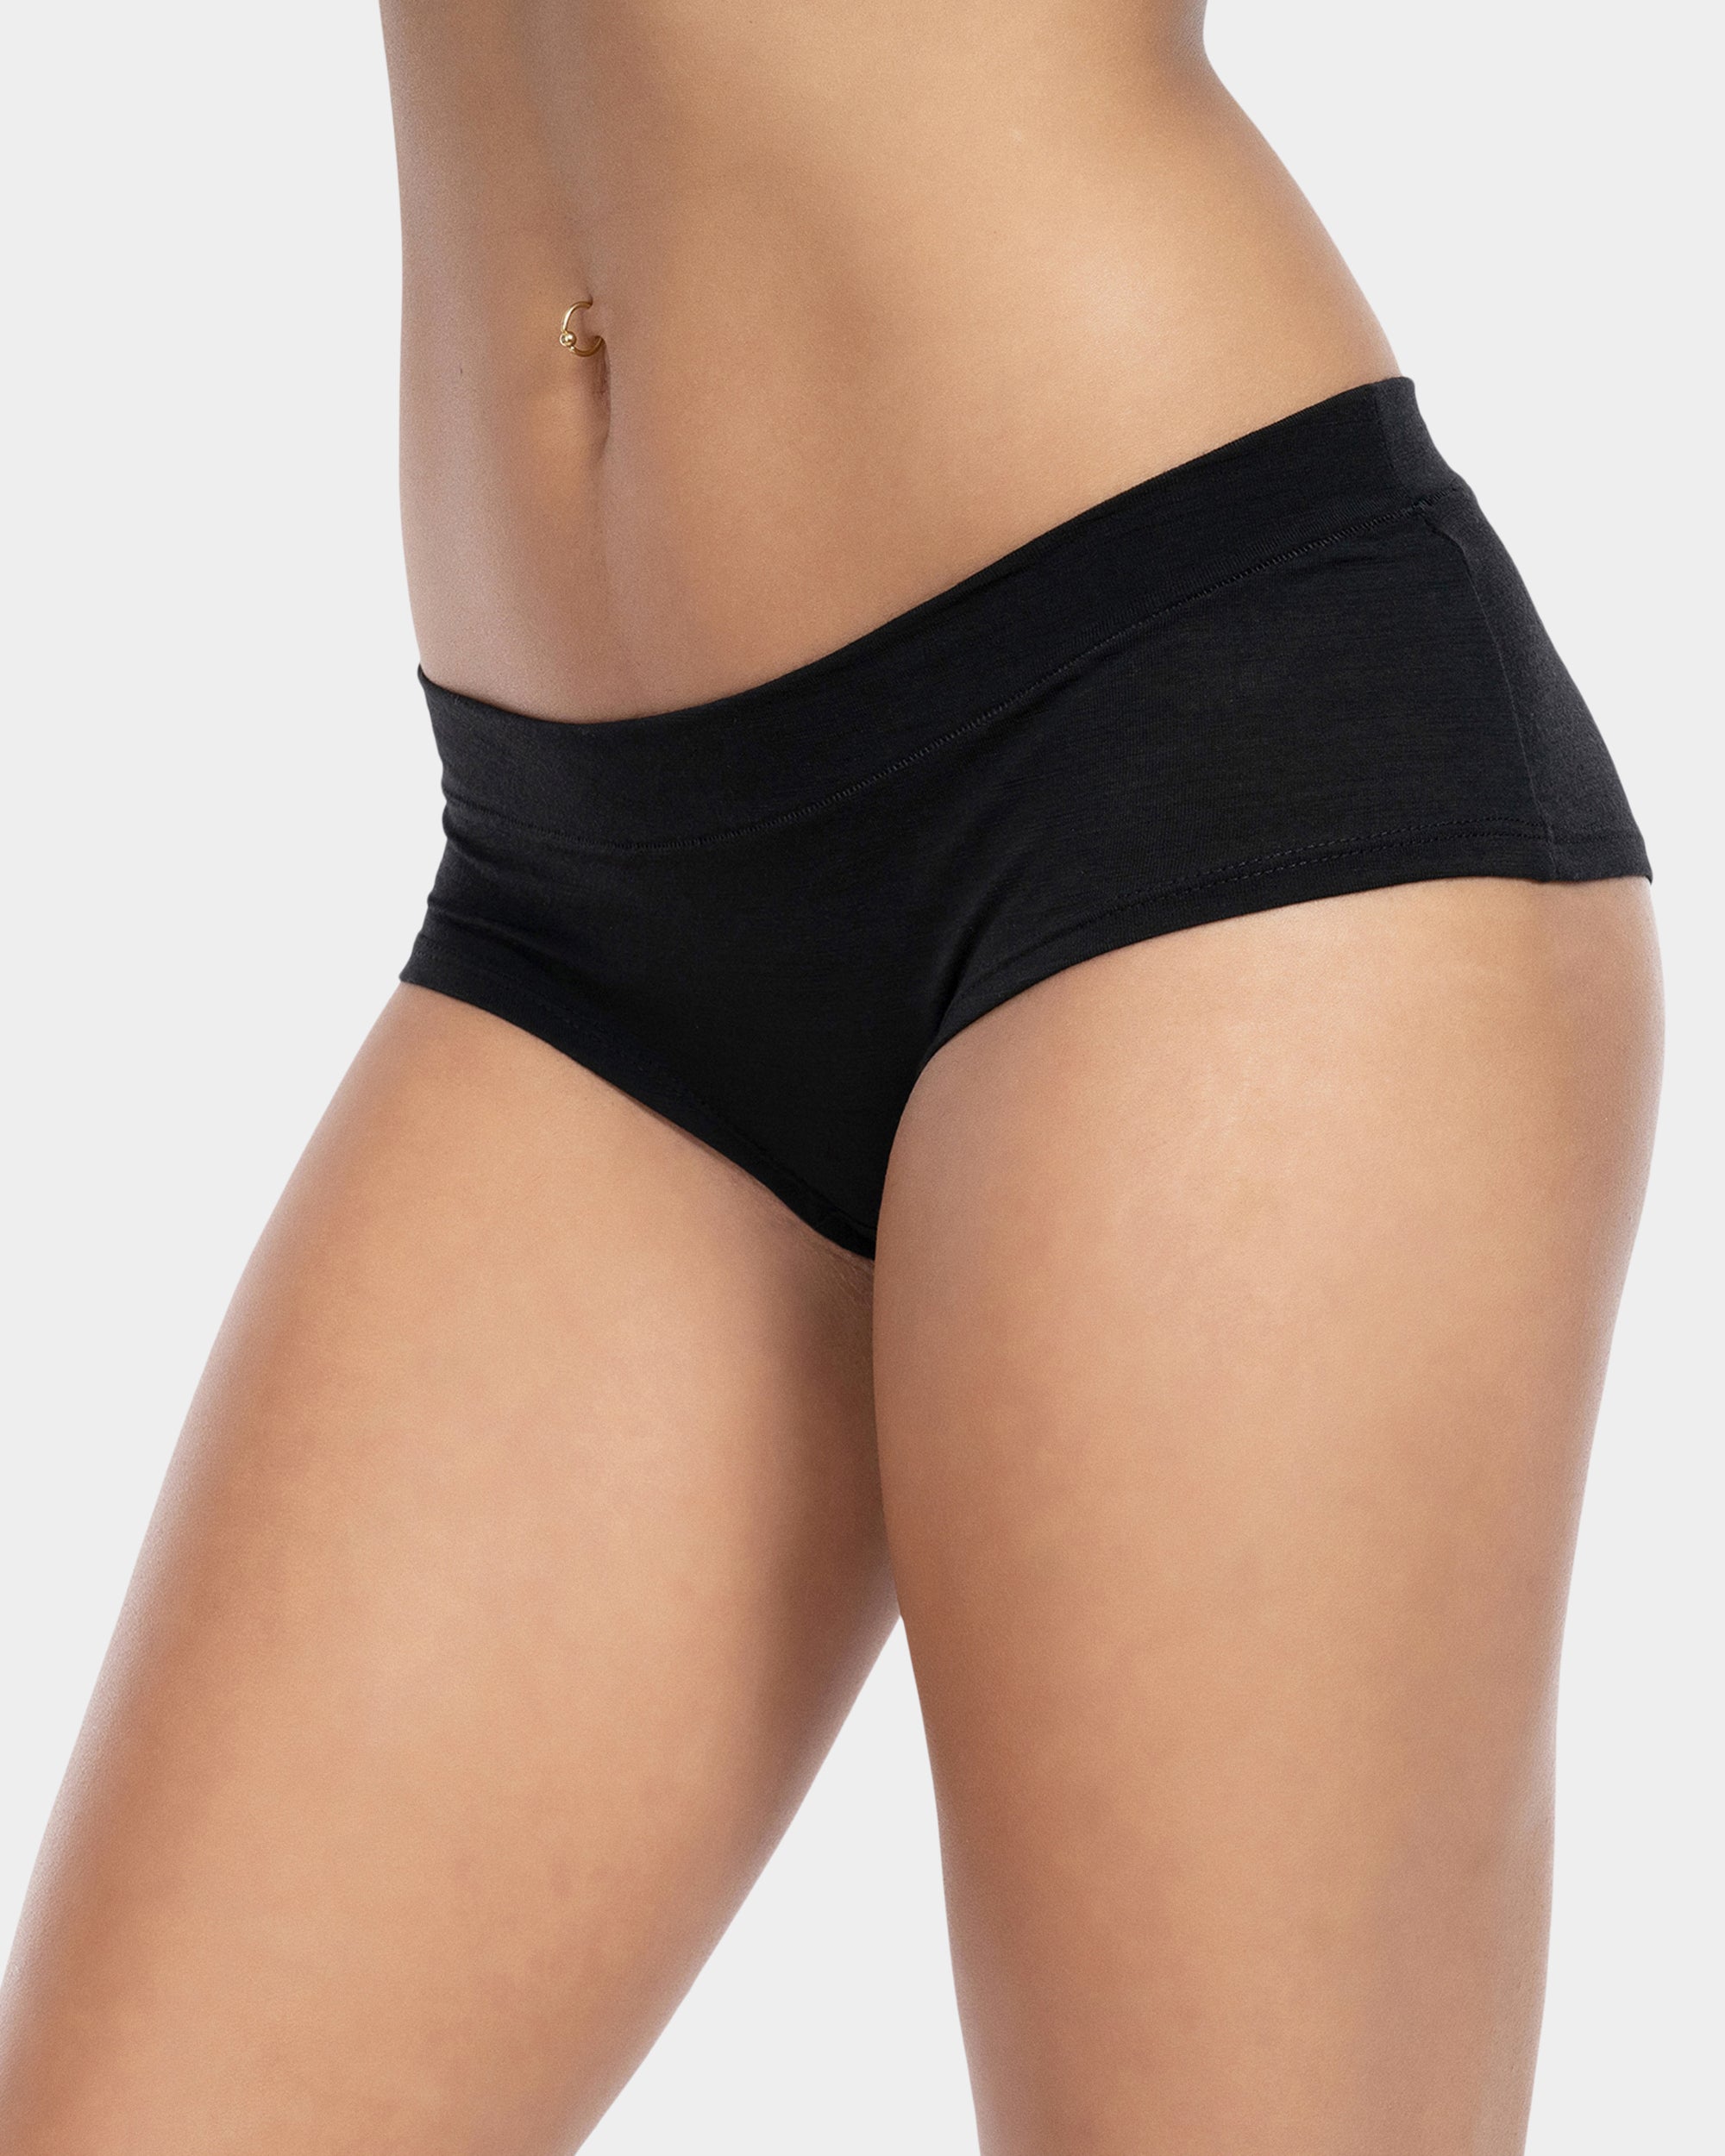 Buy QUINN CHEEKY BRIEF online at Intimo